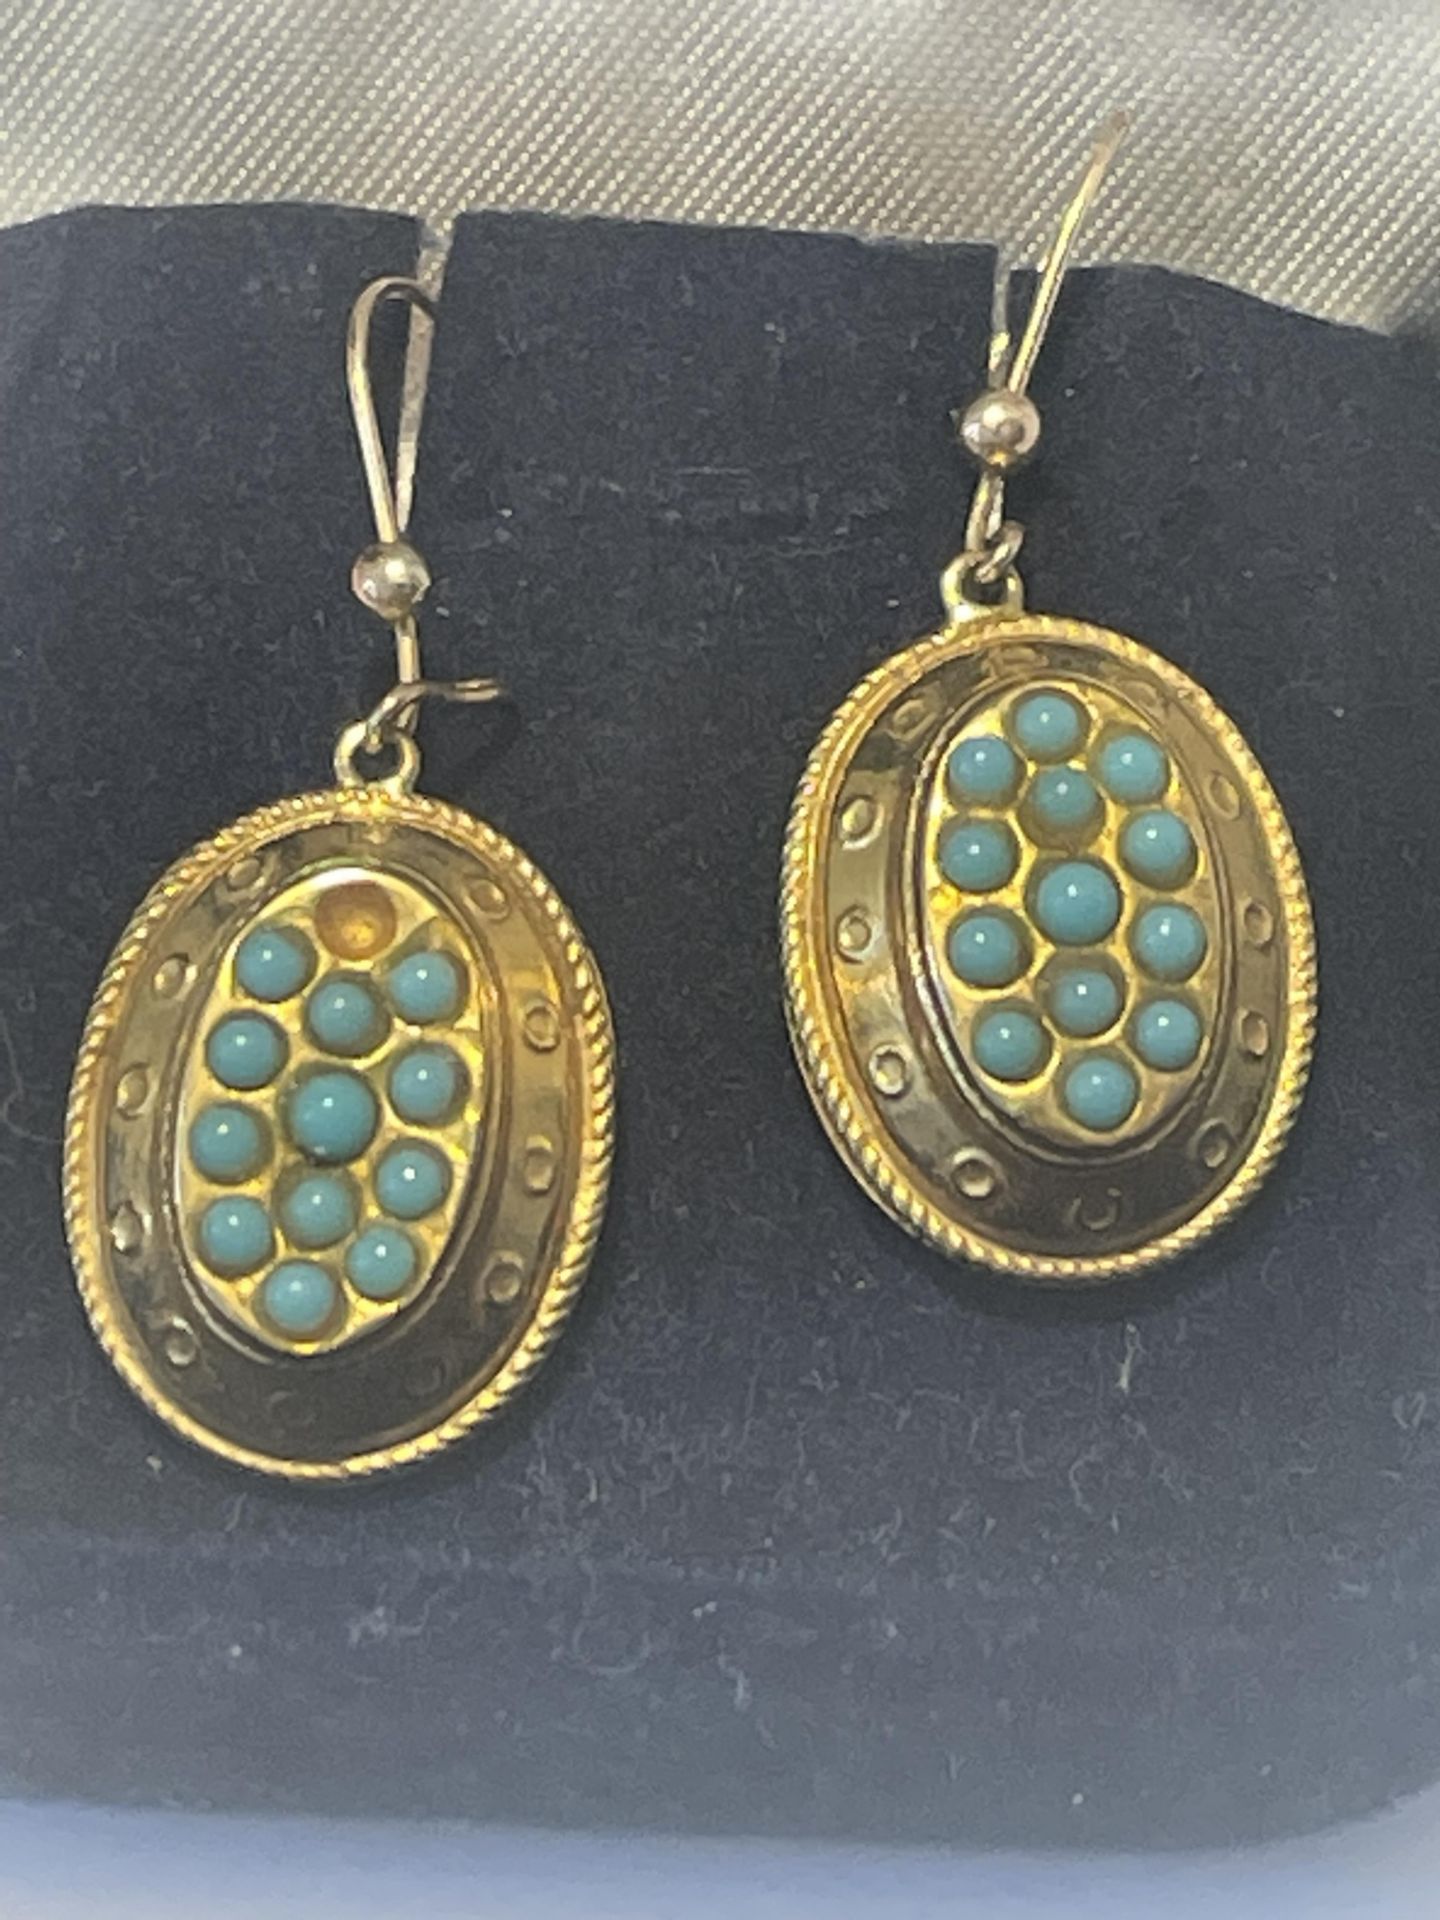 A PAIR OF 9 CARAT GOLD AND TURQUOISE STONE EARRINGS GROSS WEIGHT 2.19 GRAMS IN A PRESENTATION BOX - Image 3 of 3